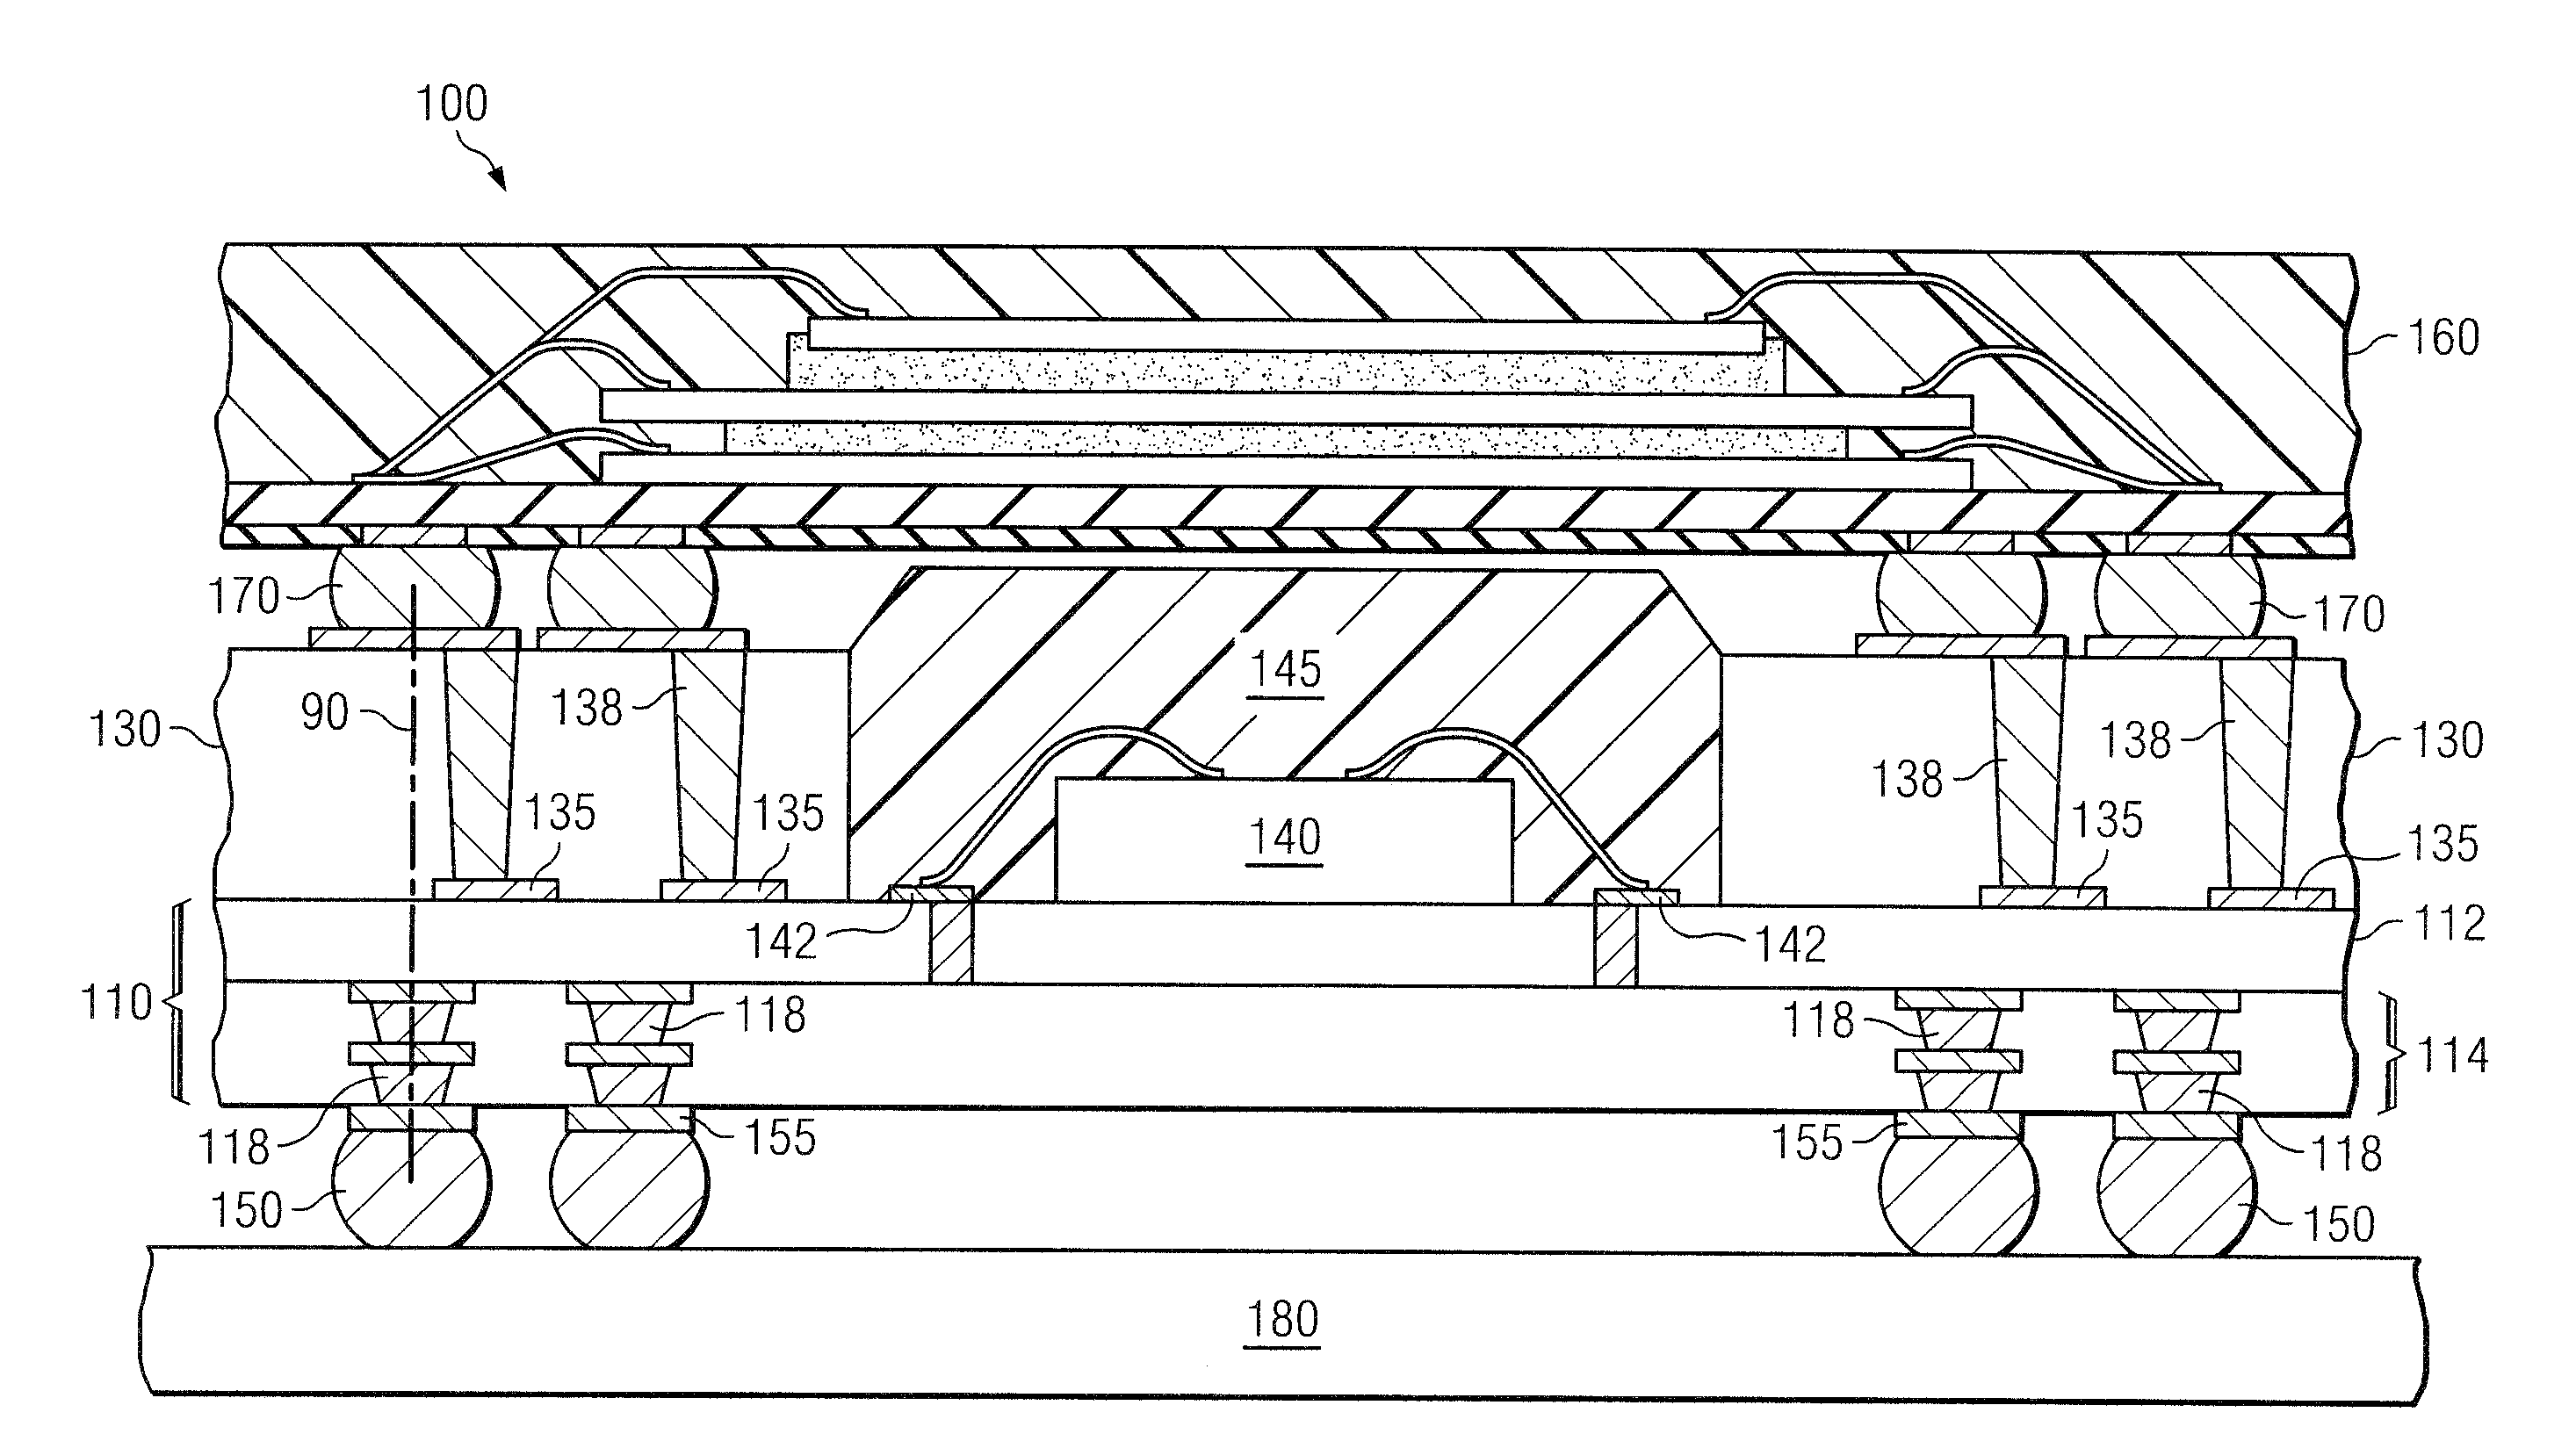 Substrate structure for cavity package